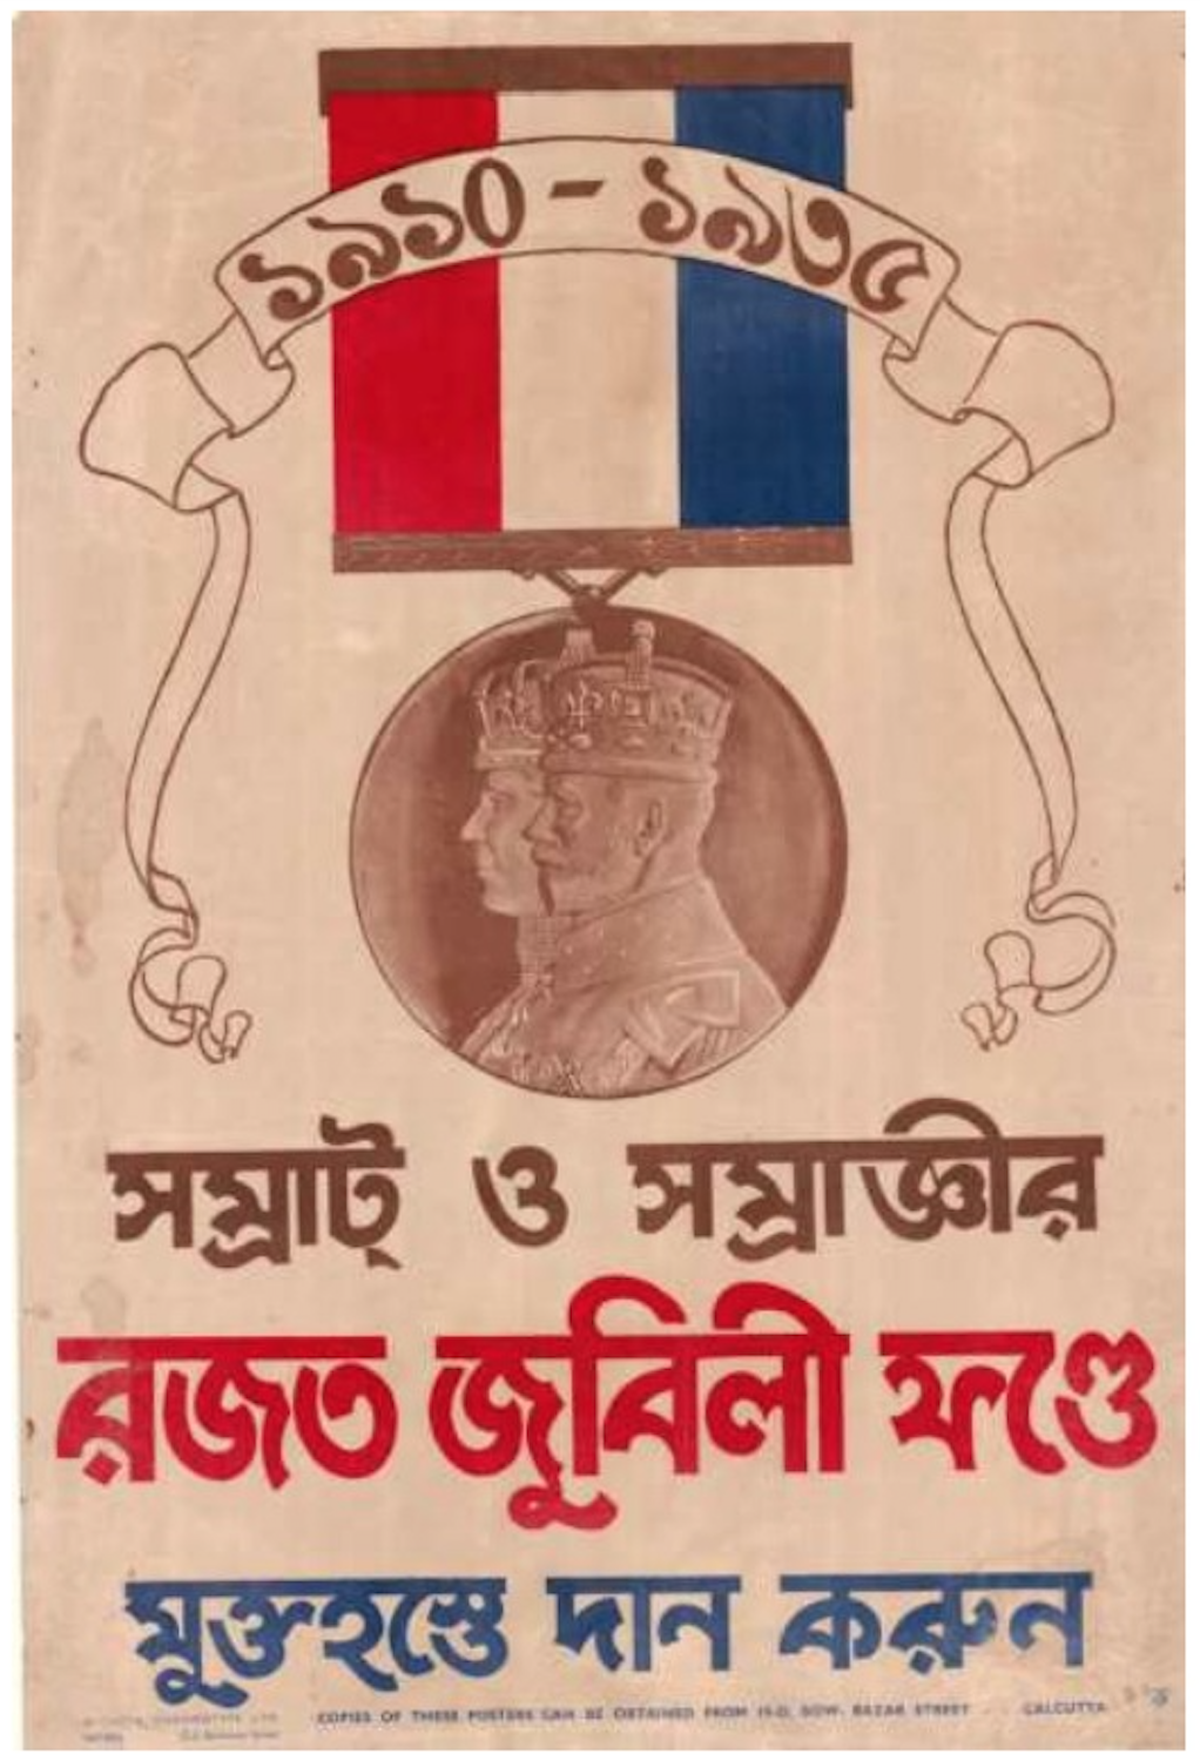 A poster depicting The Silver Jubilee fund, which was to be used for relief of distress and suffering in India. The Silver Jubilee is referred to 25 years of reign of George V as the King of the United Kingdom, the British Dominions and Emperor of India. It was the first-ever Silver Jubilee celebration of any British Monarch in history.